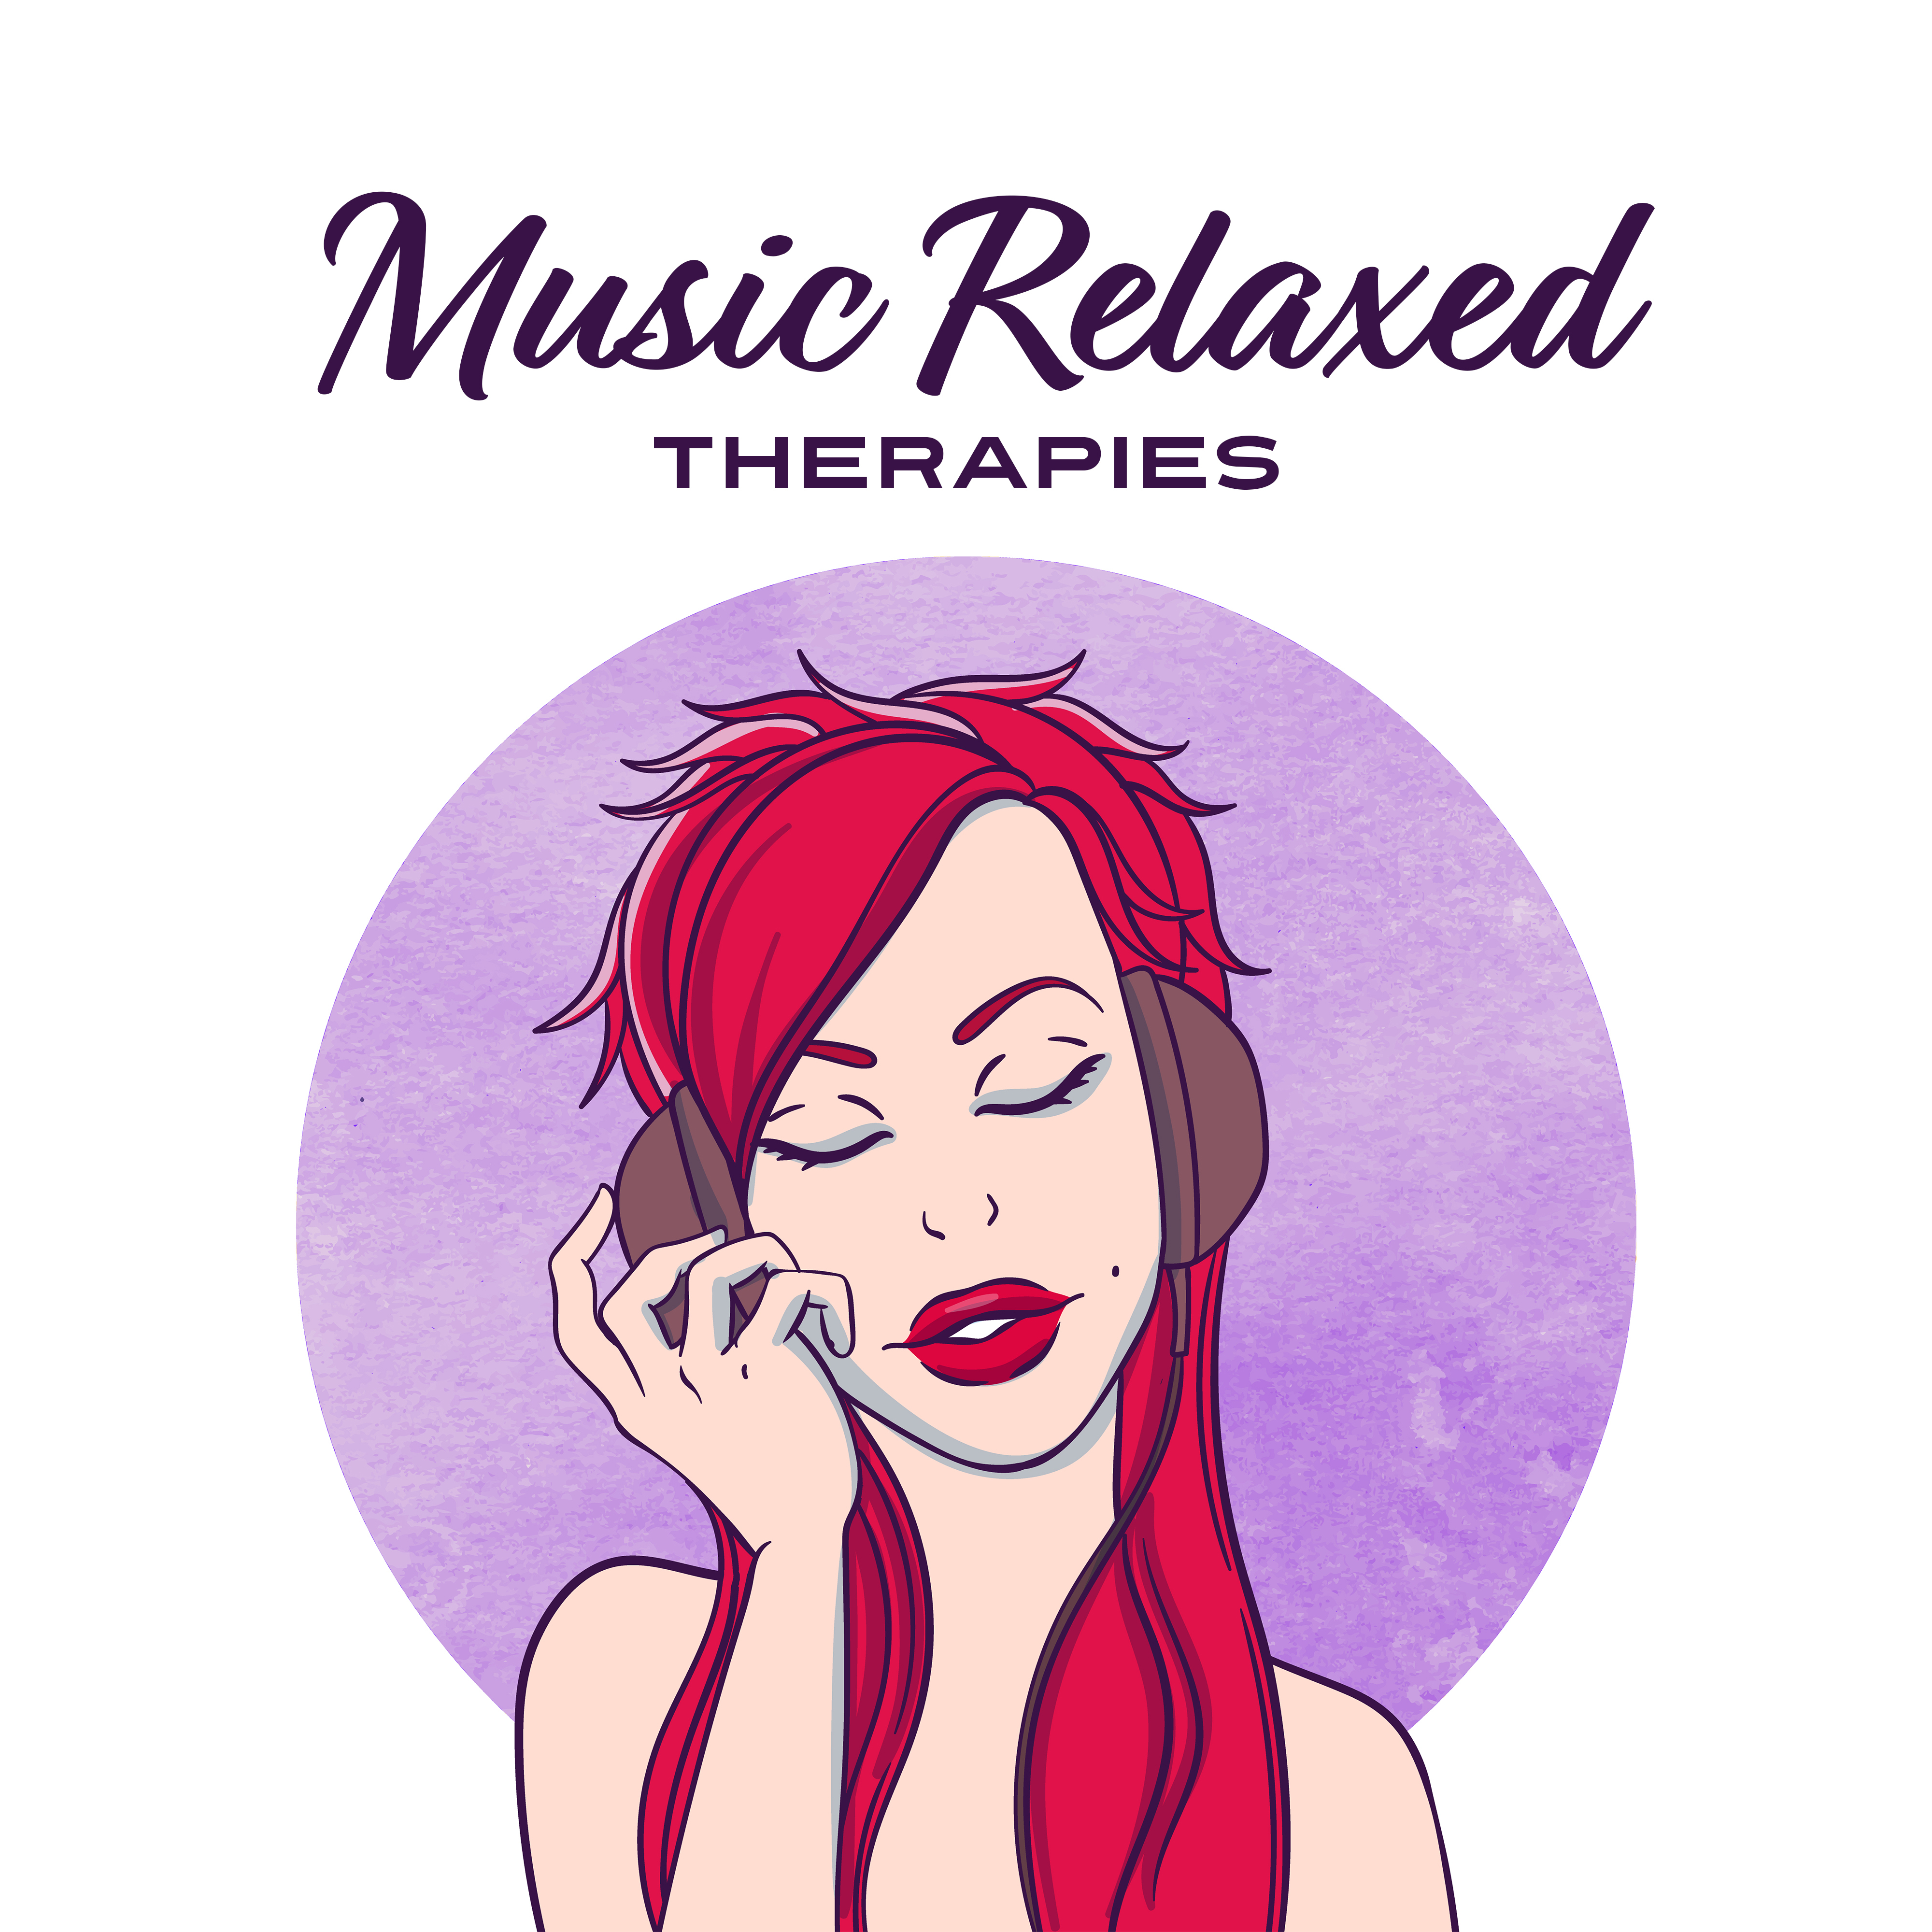 Music Relaxed Therapies